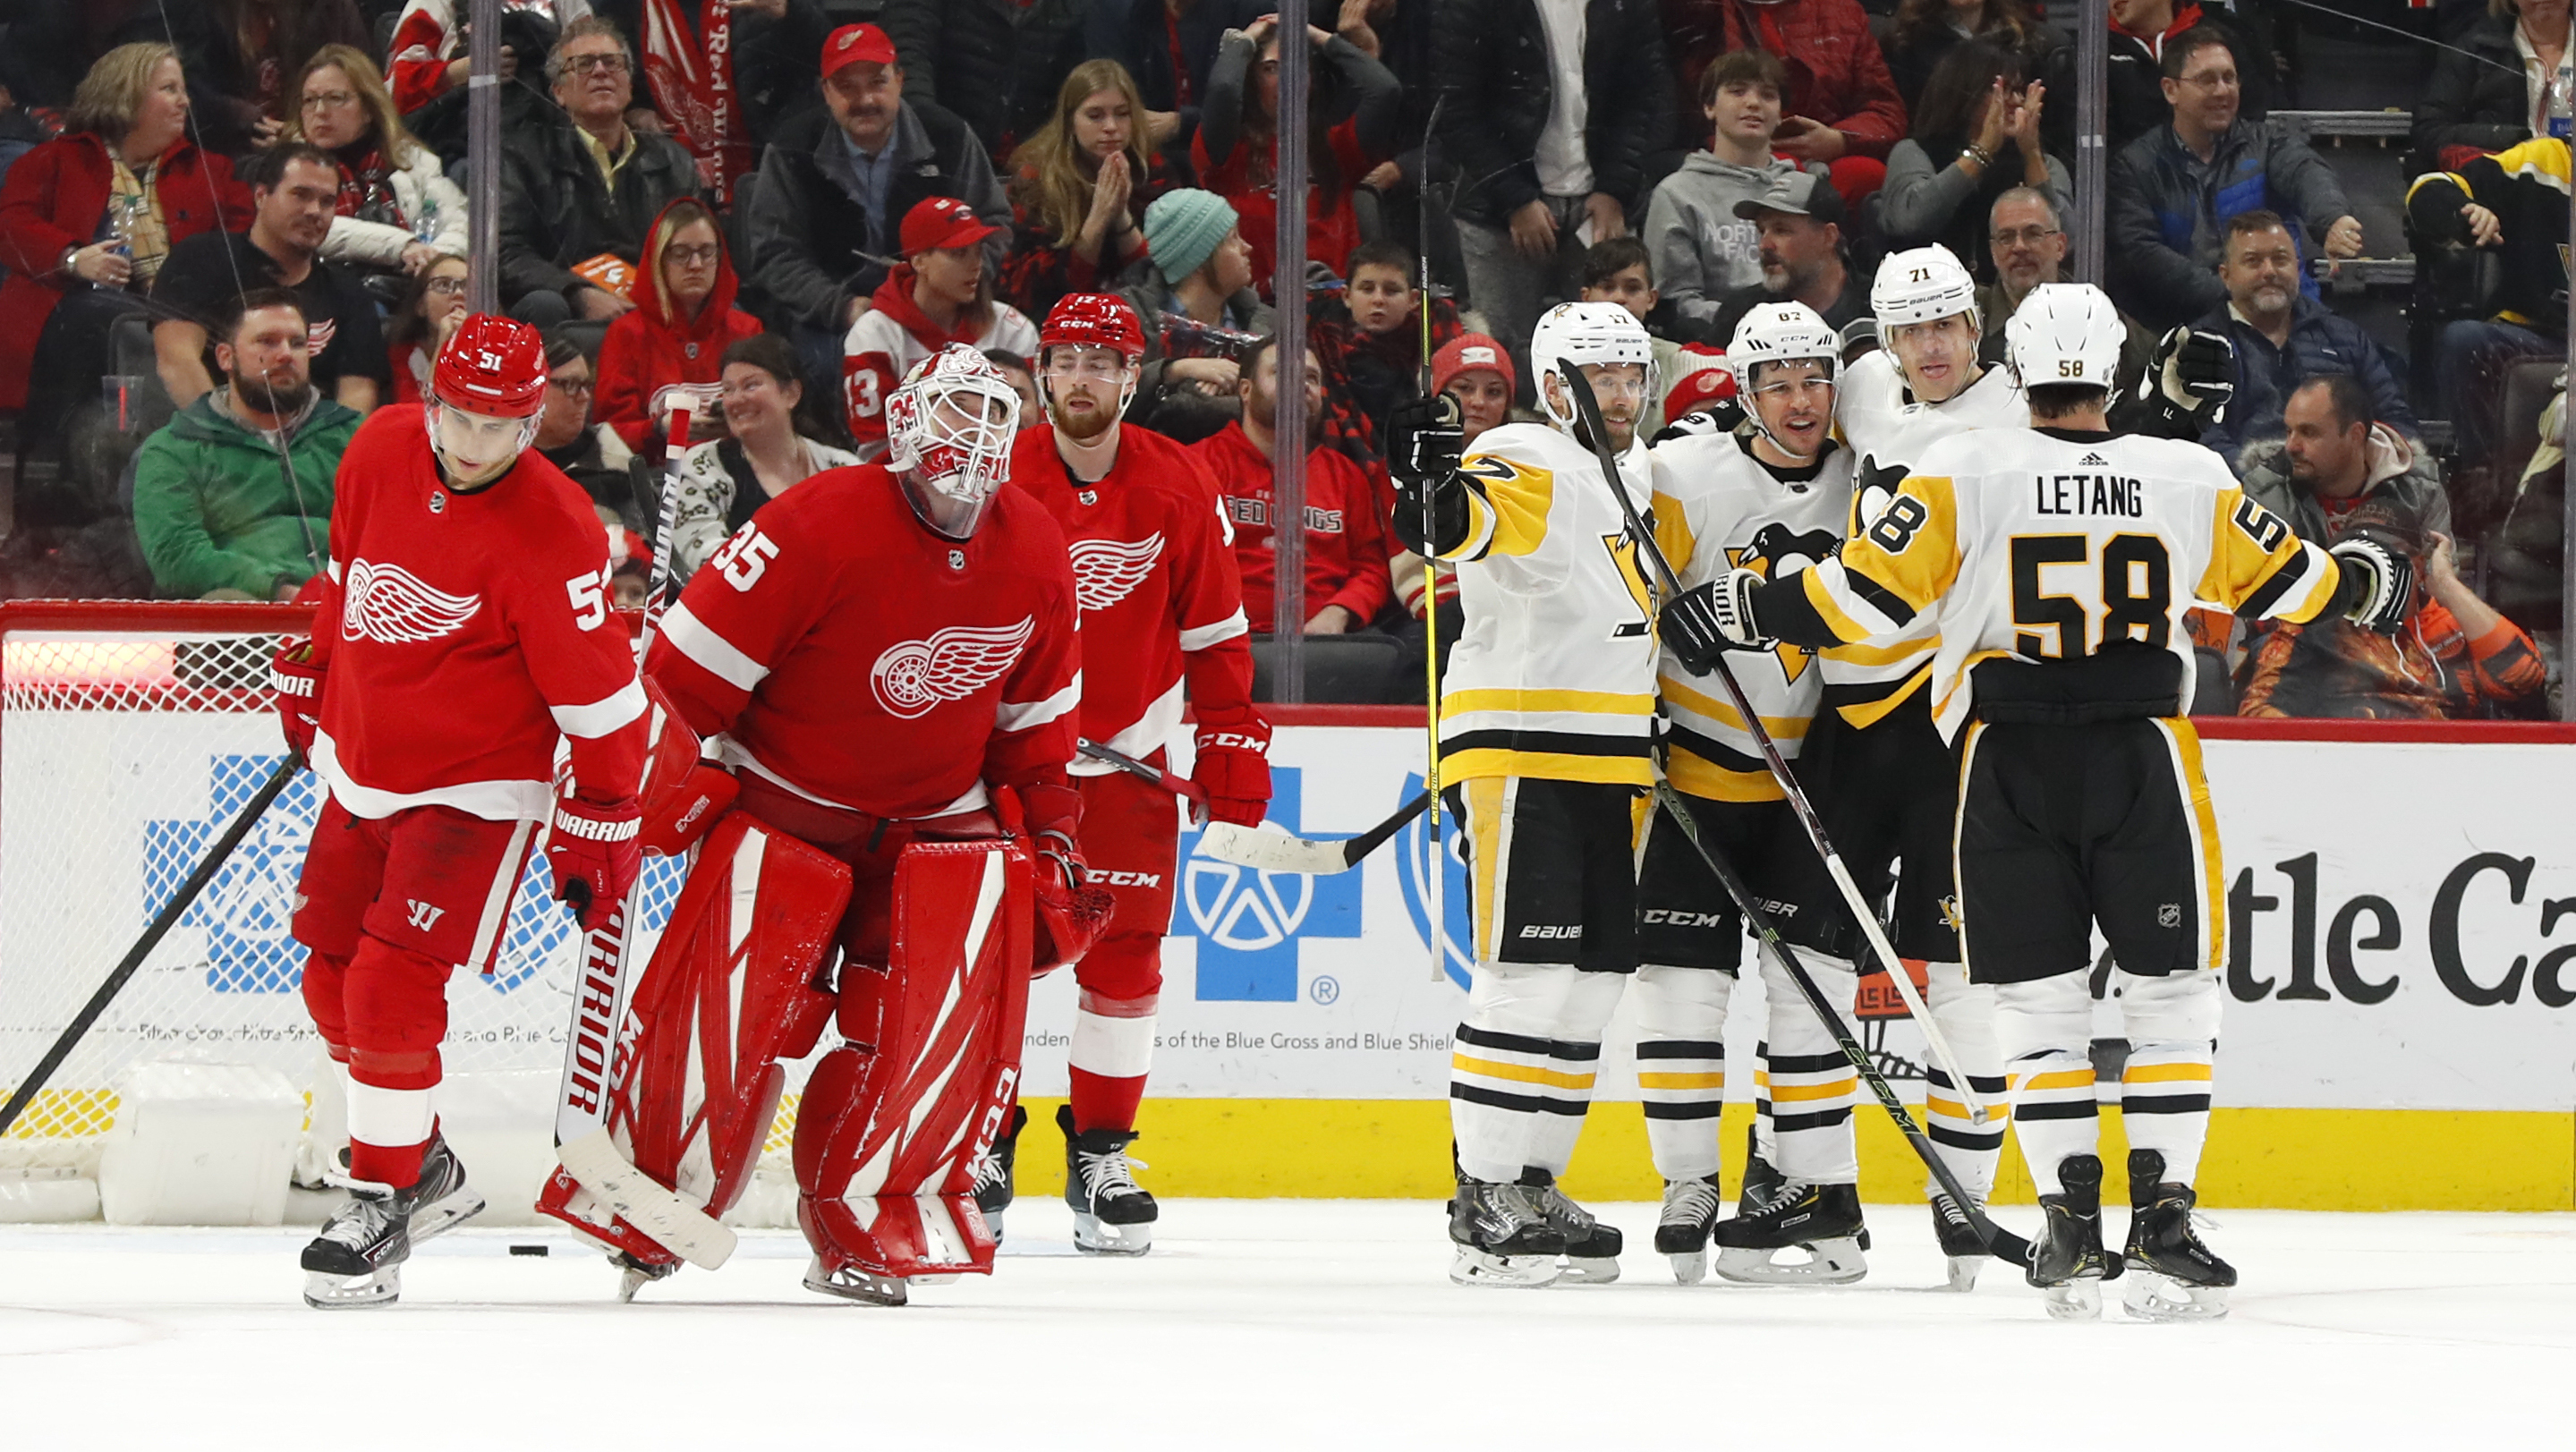 Crosby scores in OT, Penguins beat Red Wings 2-1